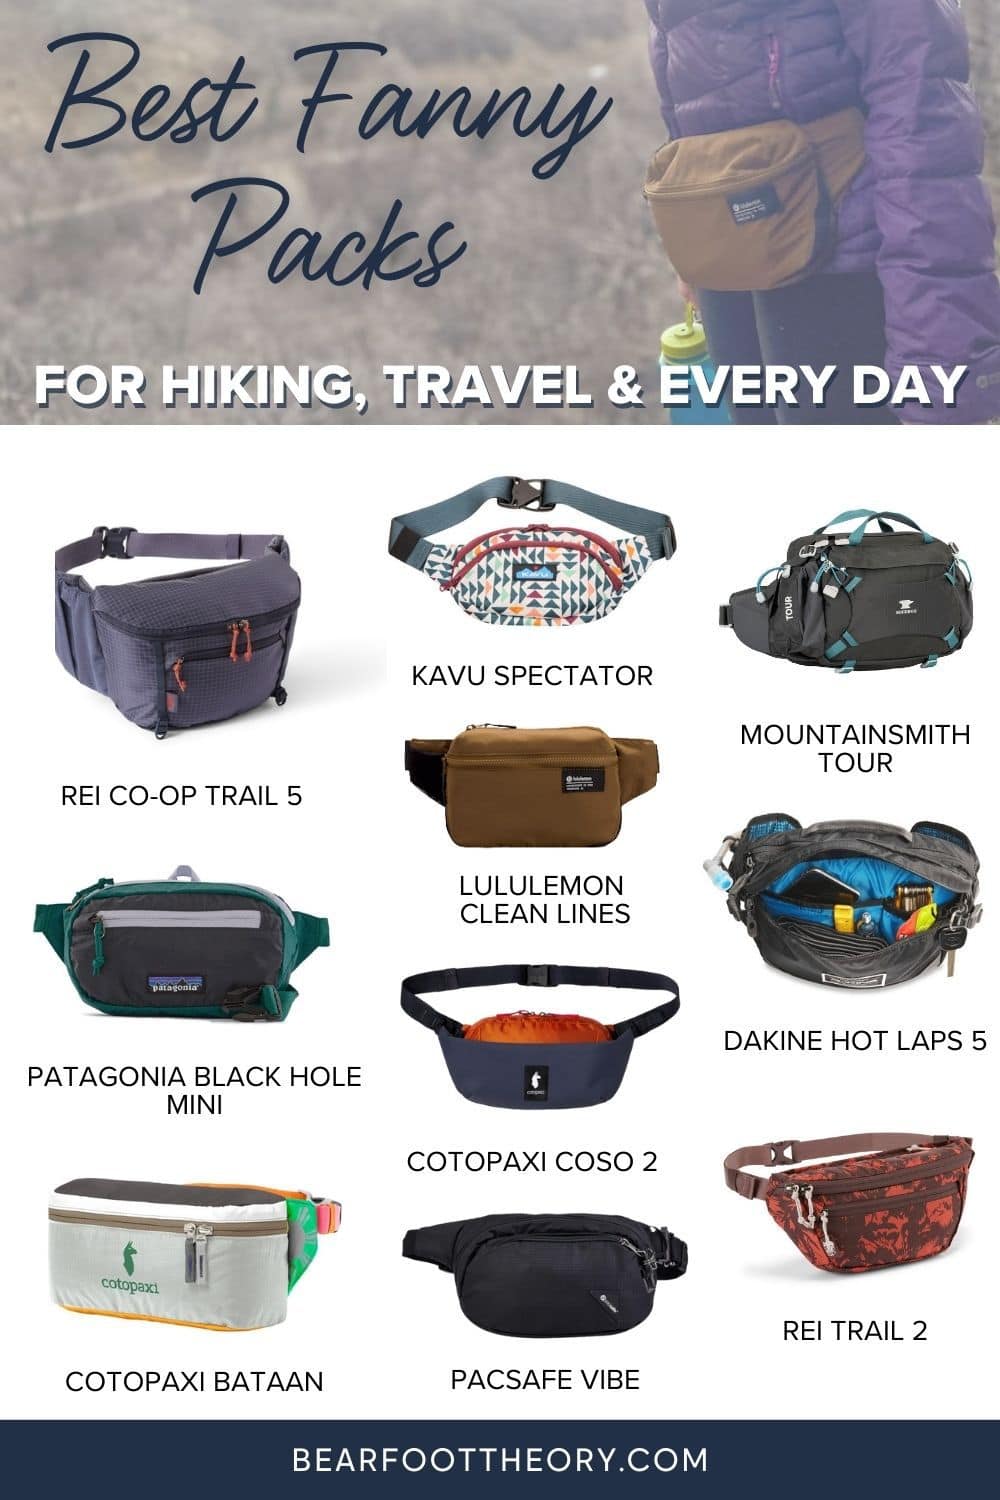 Check out our list of the best fanny packs for hiking, traveling, road trips, and everyday wear that are stylish and functional.